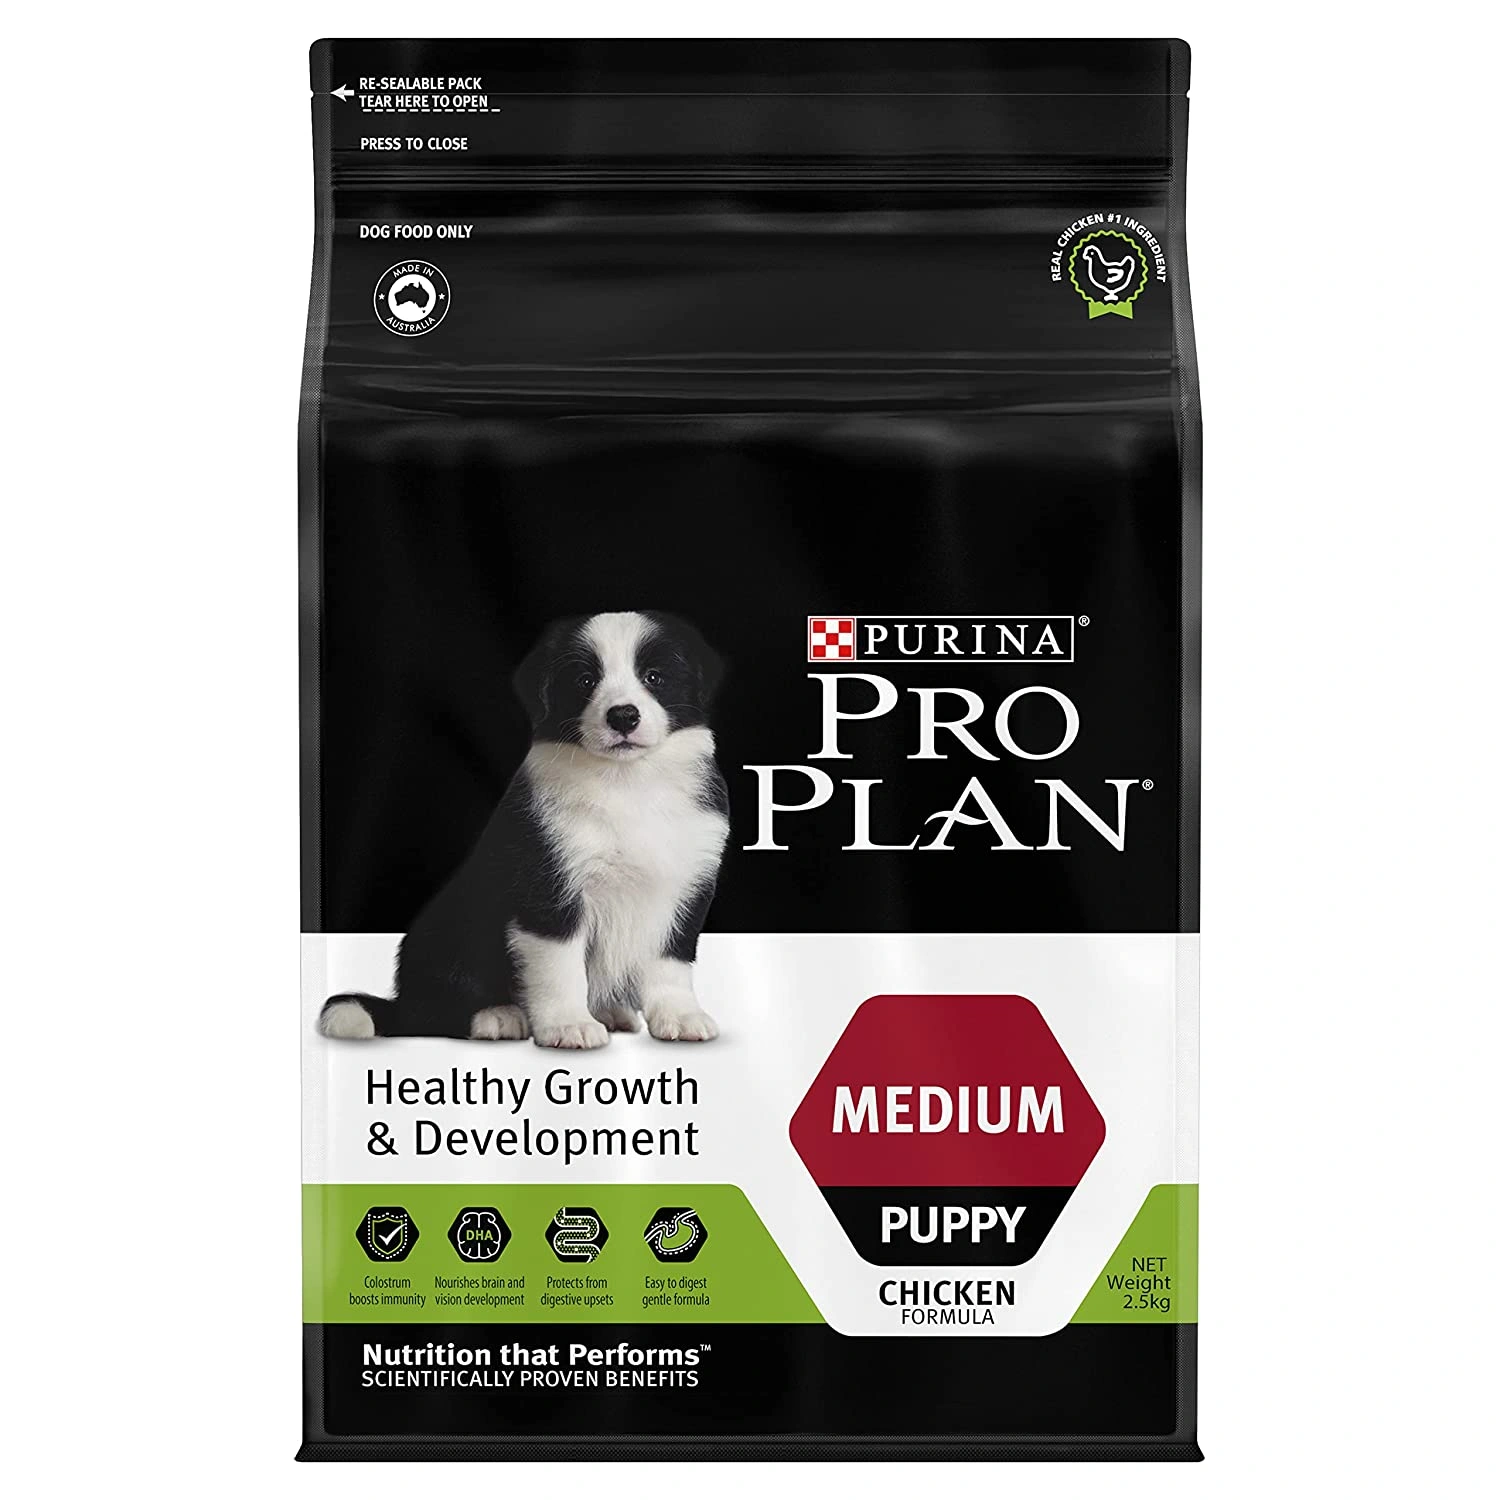 PURINA PRO PLAN Puppy Dry Dog Food for Medium Breed 2.5kg-PPP